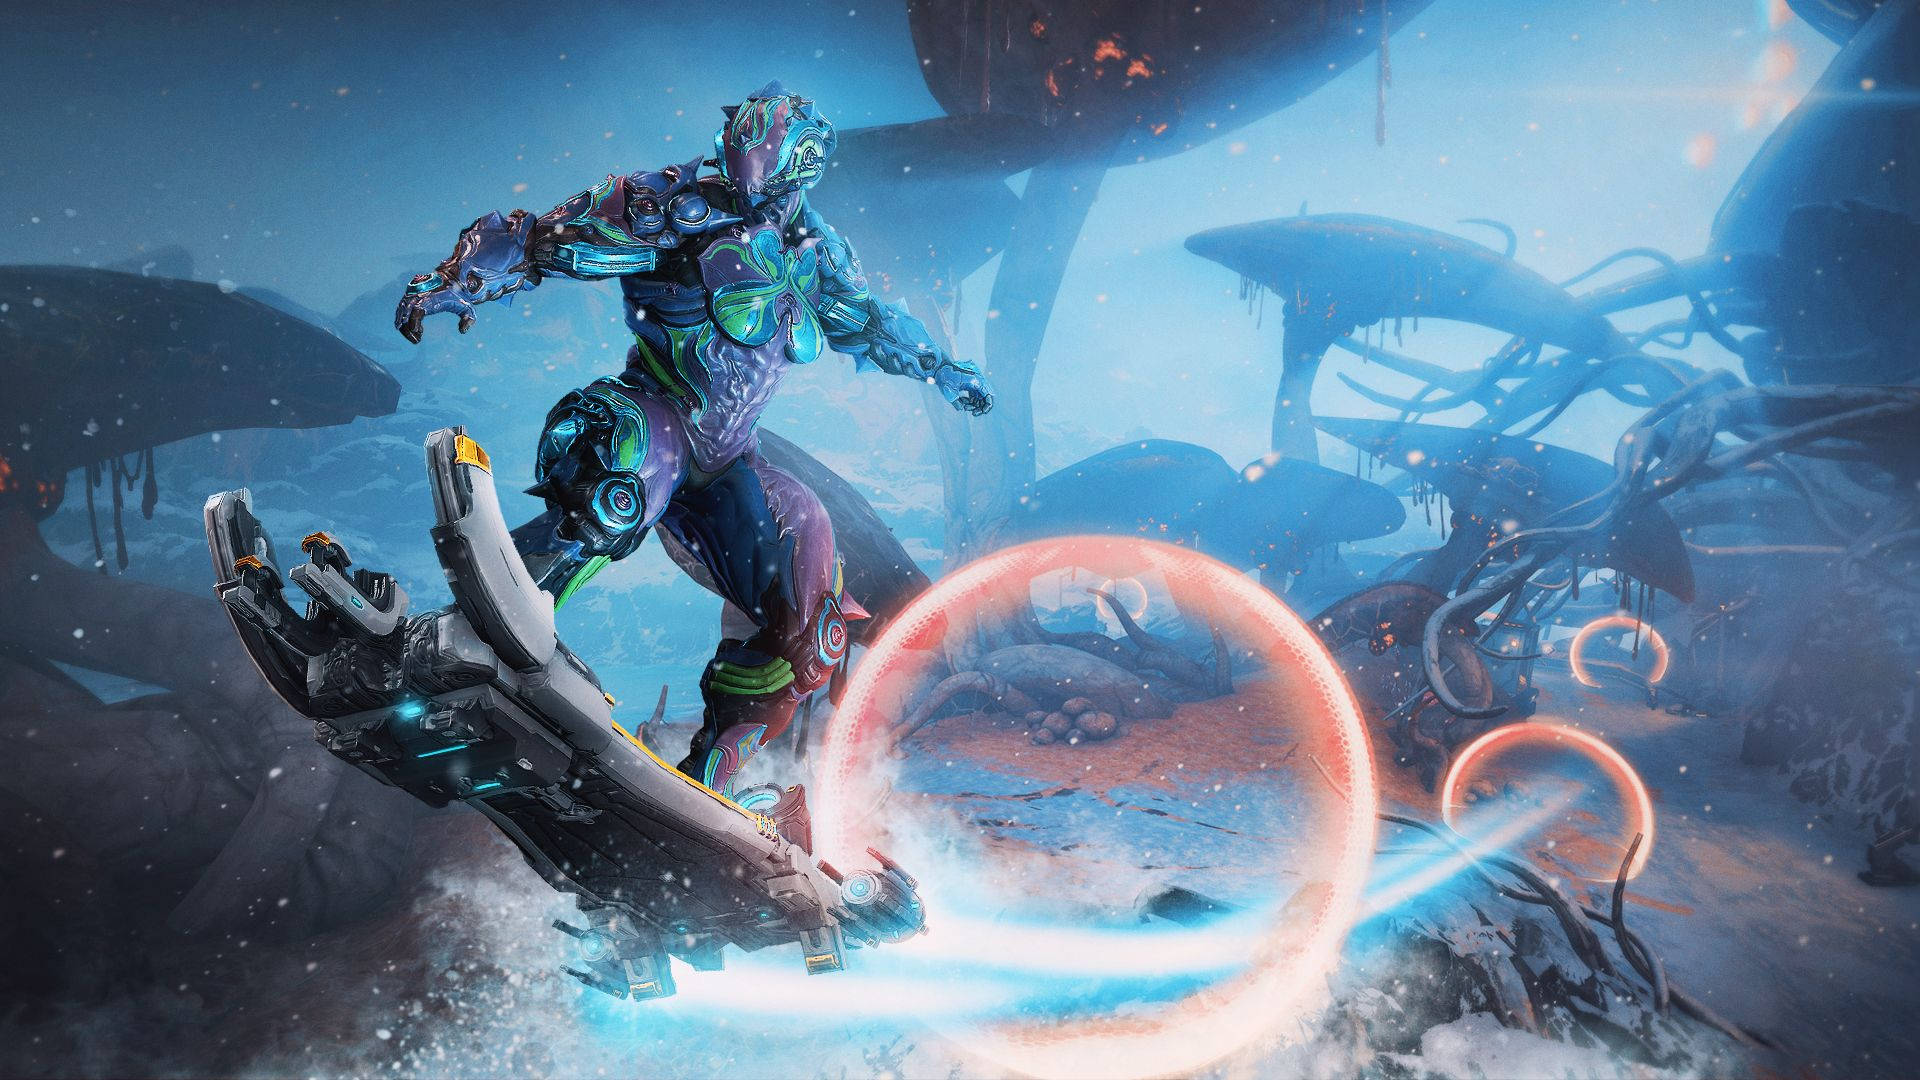 Tenno soldier riding hoverboard from Warframe Fortuna expansion wallpaper. 